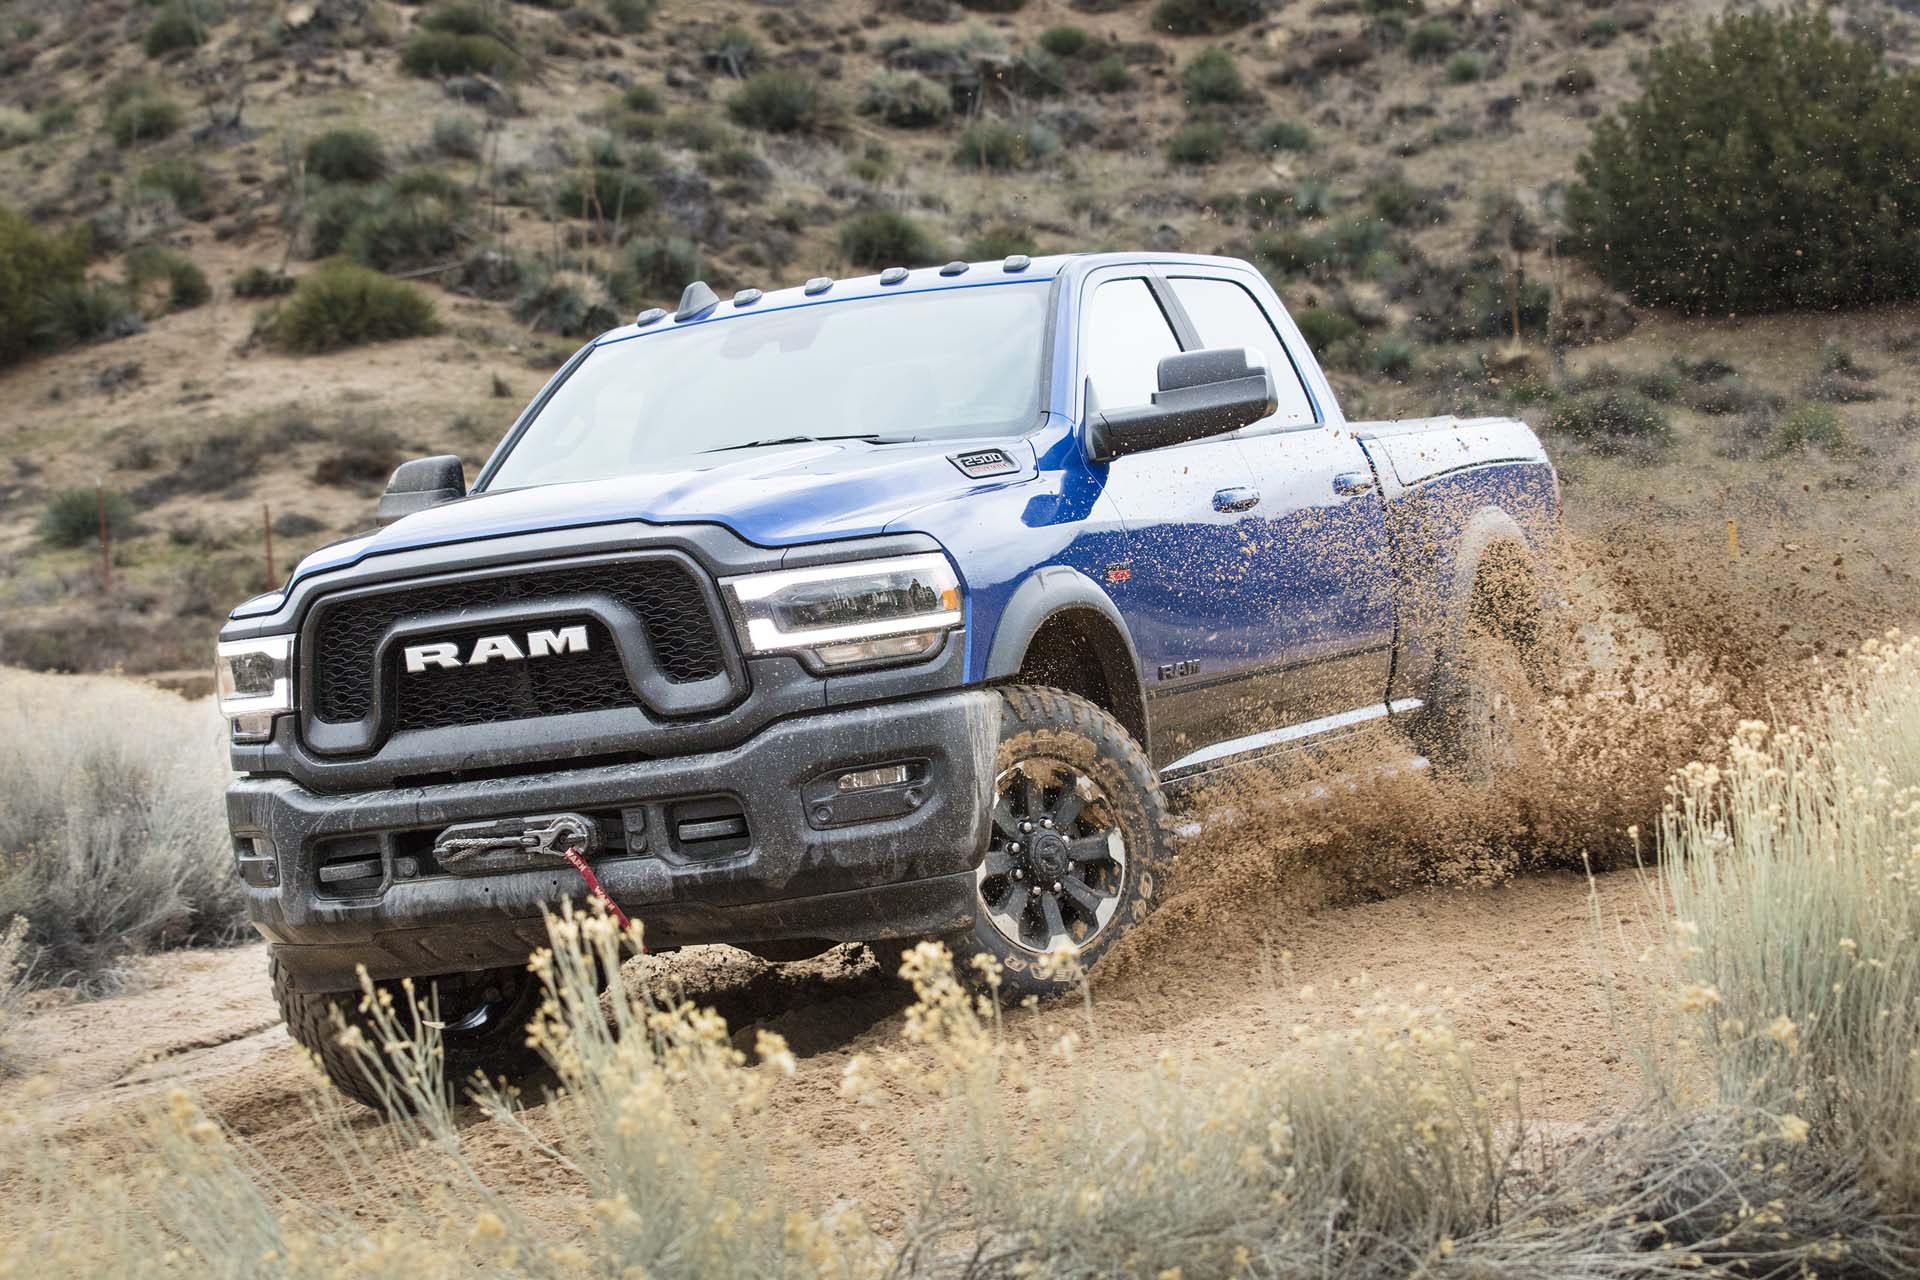 2019 Ram 2500 Power Wagon Off-road Wallpaper - Off-road Vehicle , HD Wallpaper & Backgrounds